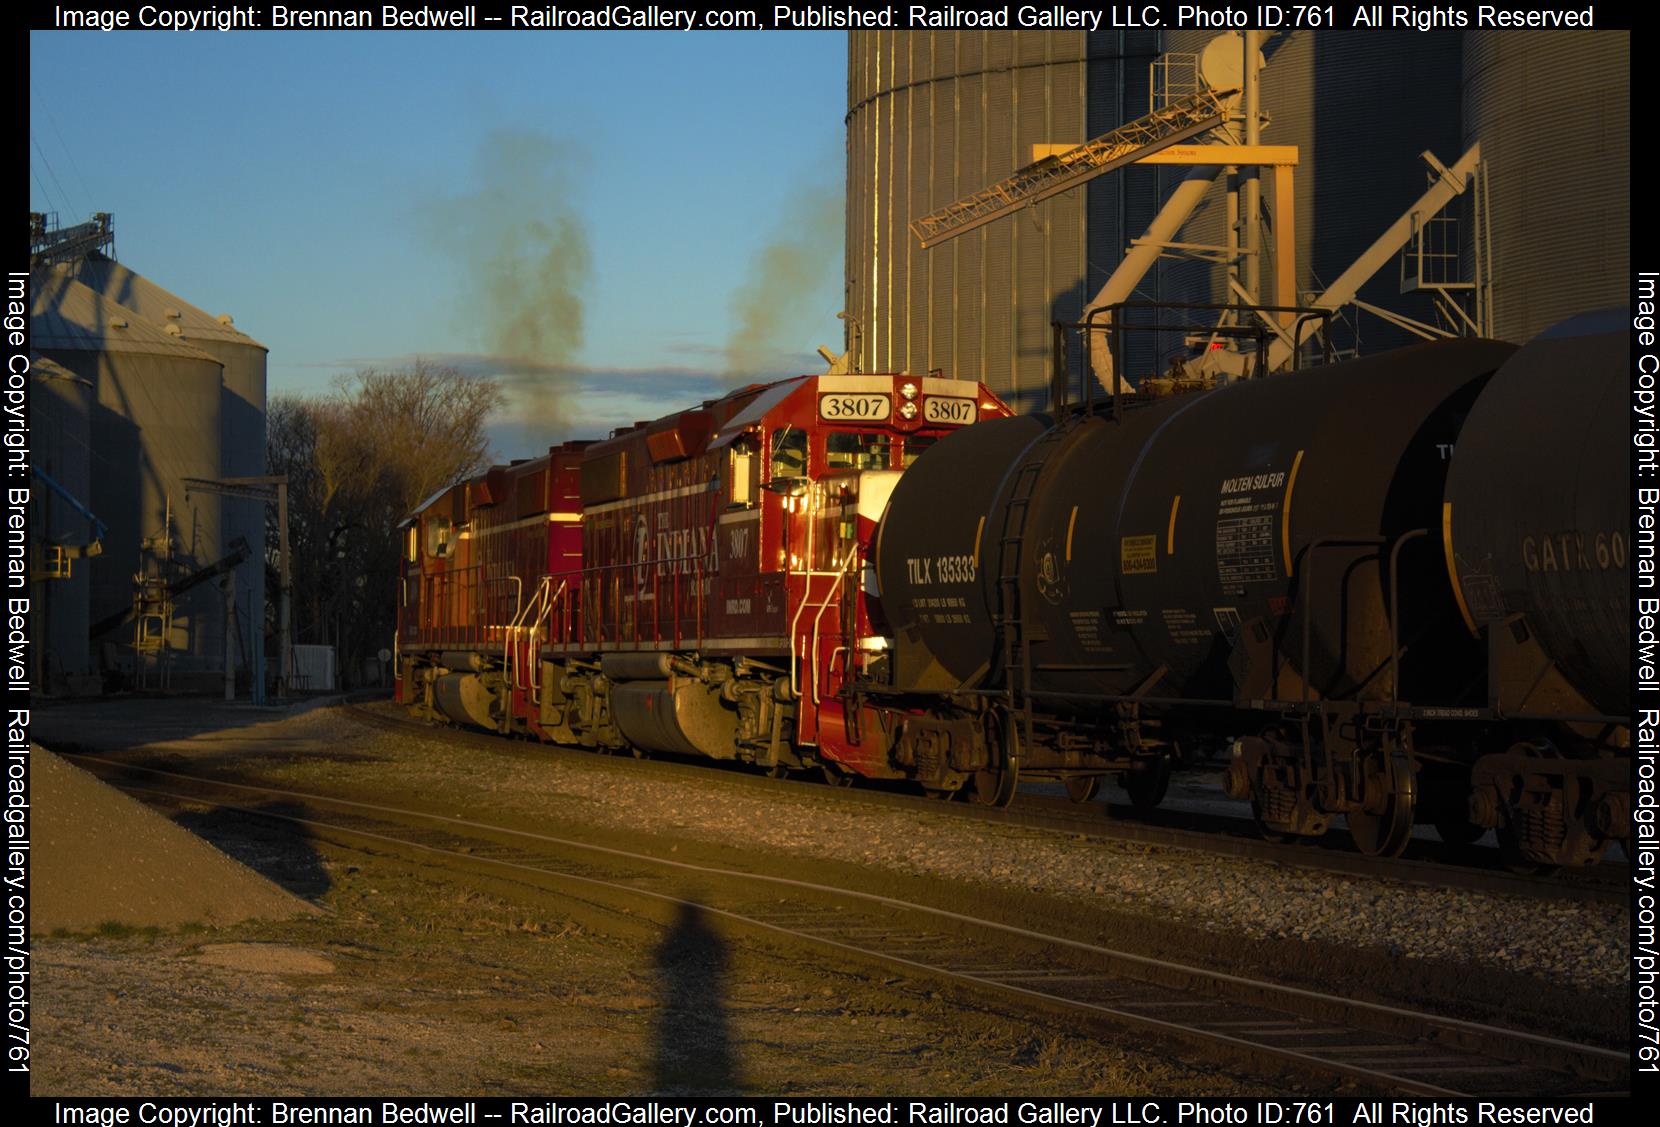 INRD 3807 is a class GP38-2 and  is pictured in Palestine, Illinois, United States.  This was taken along the Indianapolis Subdivision on the Indiana Rail Road. Photo Copyright: Brennan Bedwell uploaded to Railroad Gallery on 02/26/2023. This photograph of INRD 3807 was taken on Sunday, February 19, 2023. All Rights Reserved. 